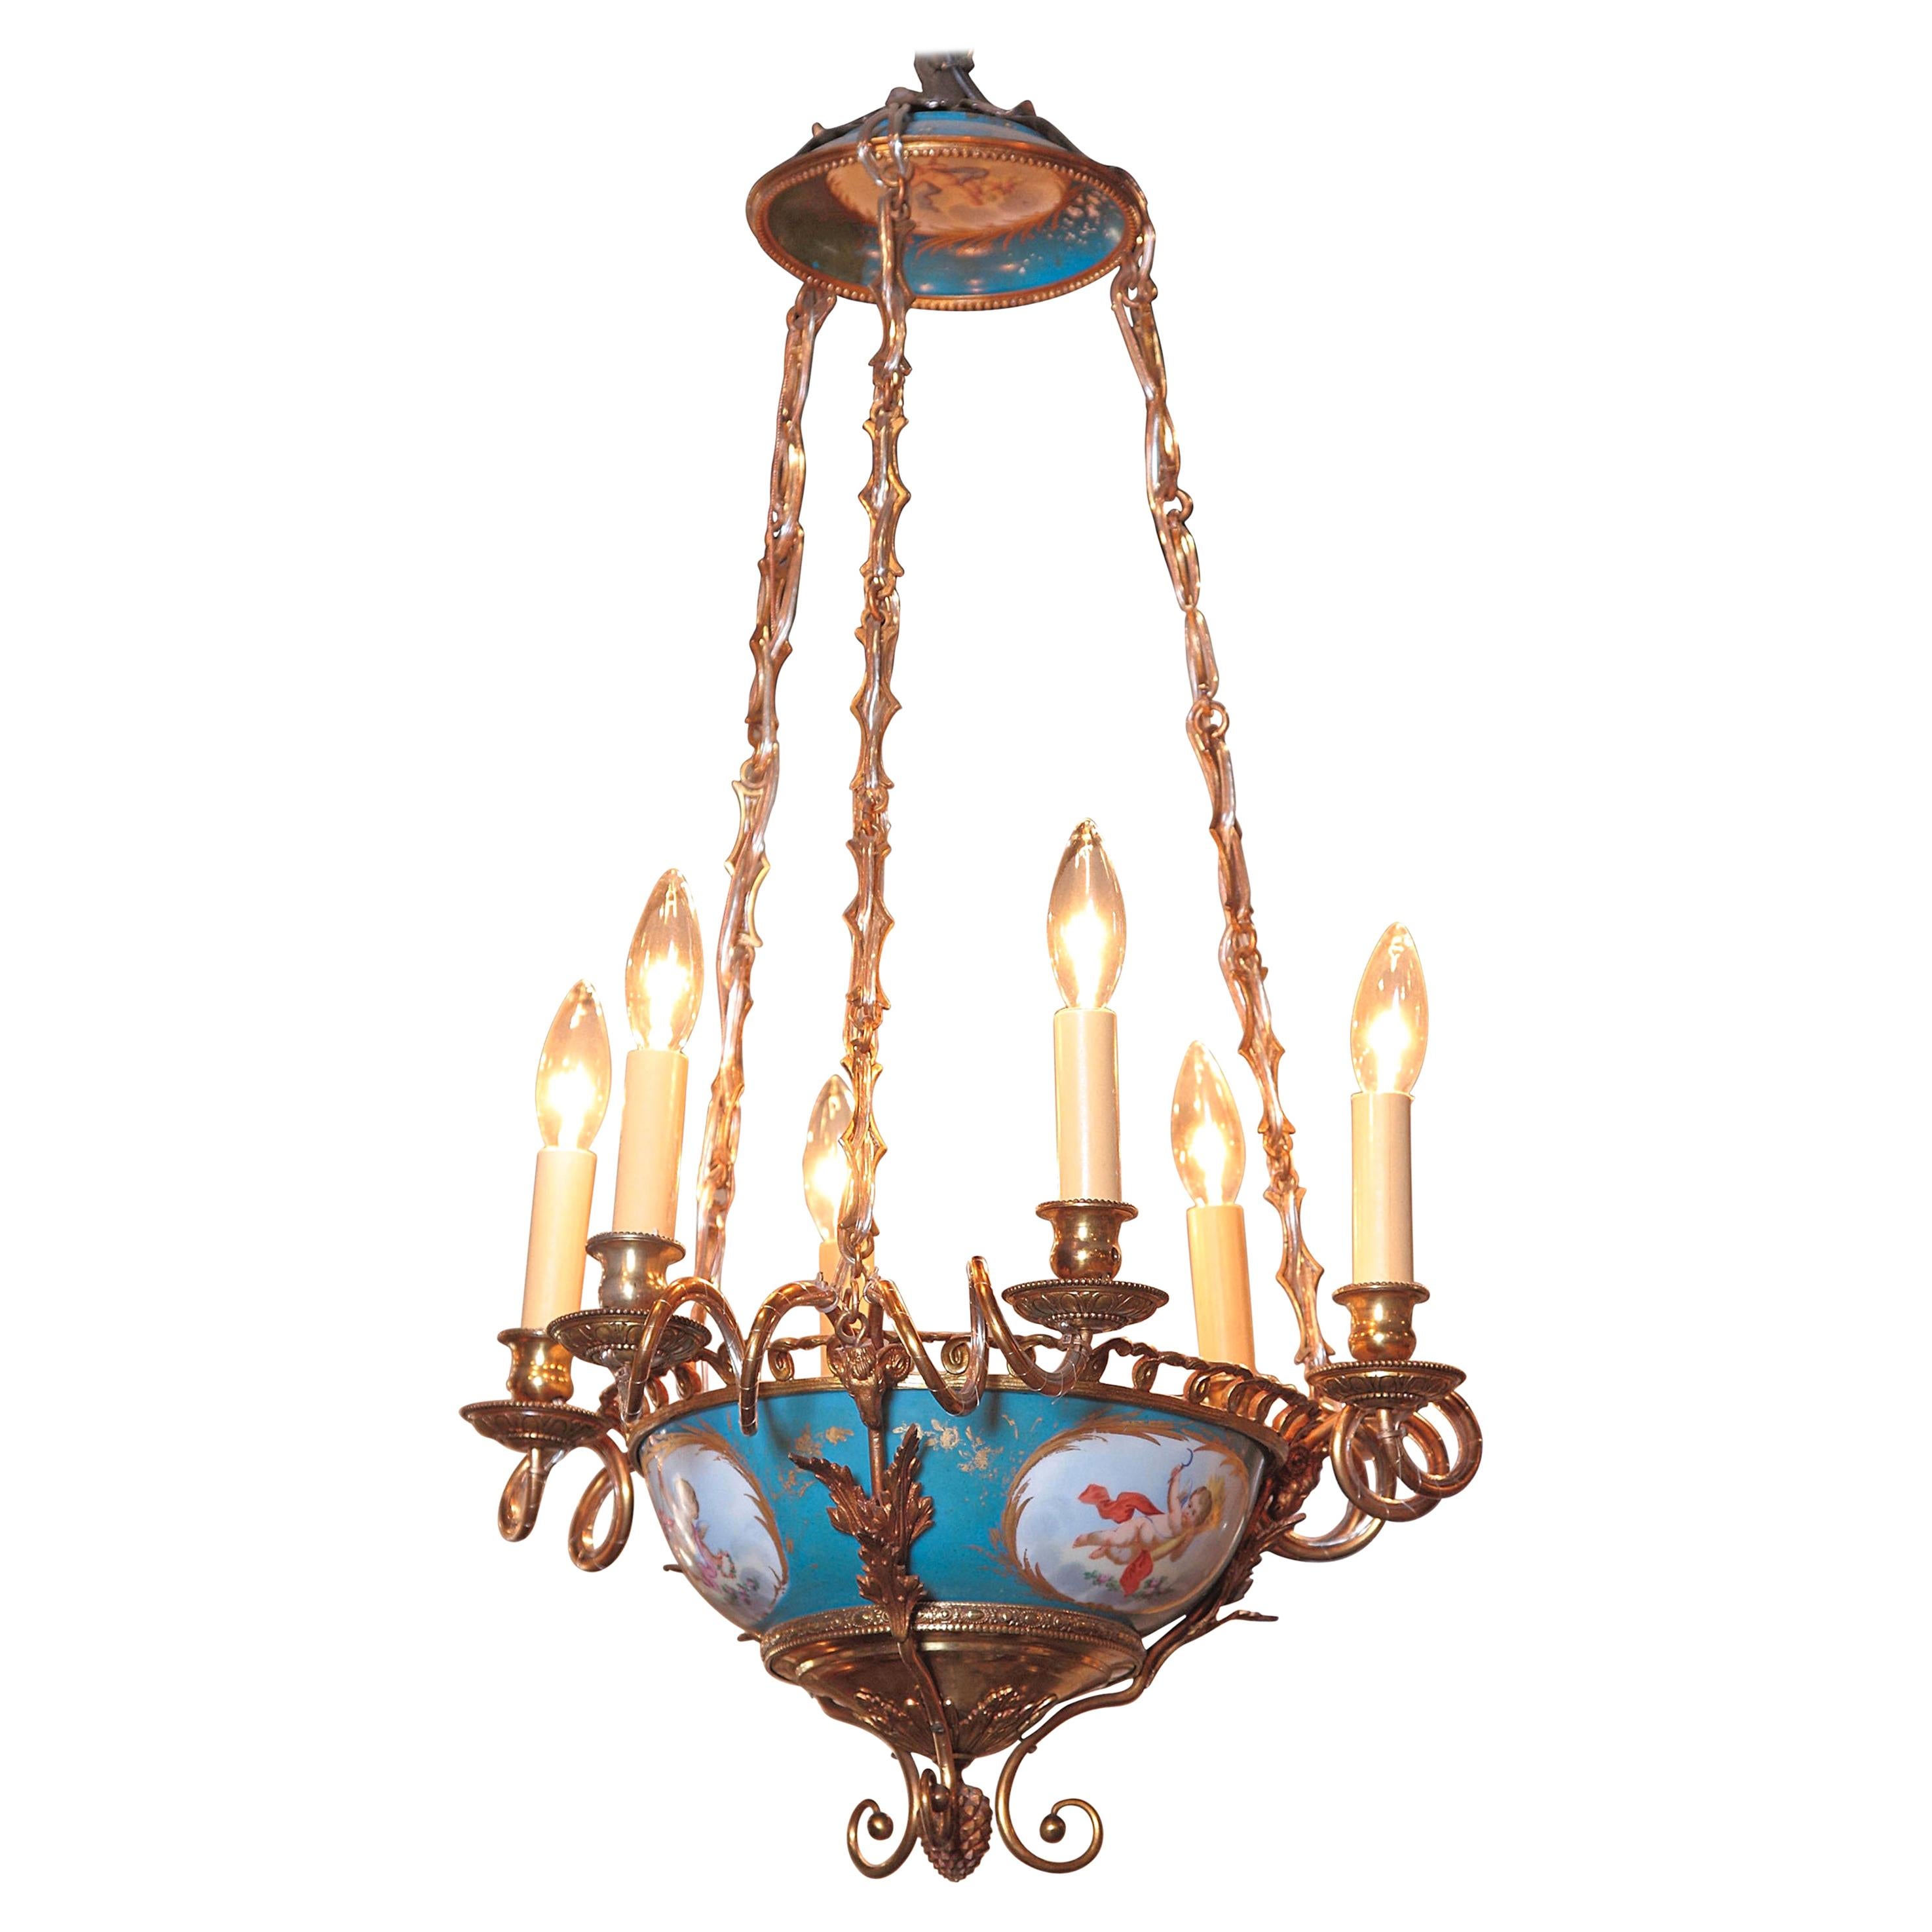 19th Century French Painted Porcelain and Brass Sevres Six-Light Chandelier